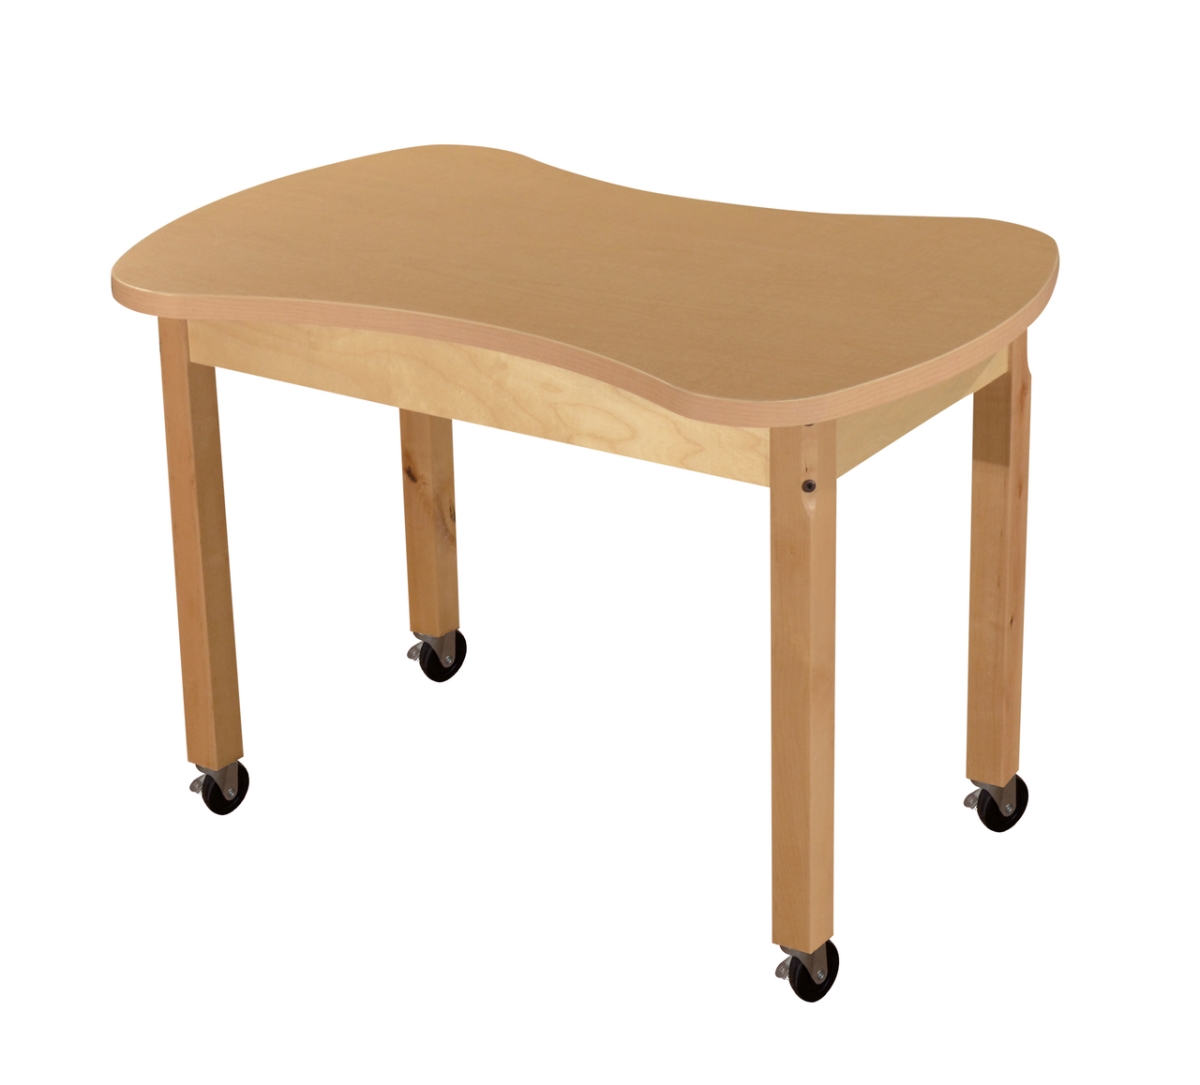 Picture of Wood Designs HPL2436C14C6 24 x 36 in. Mobile Synergy Junction, High Pressure Laminate Table with Hardwood Legs - 14 in.